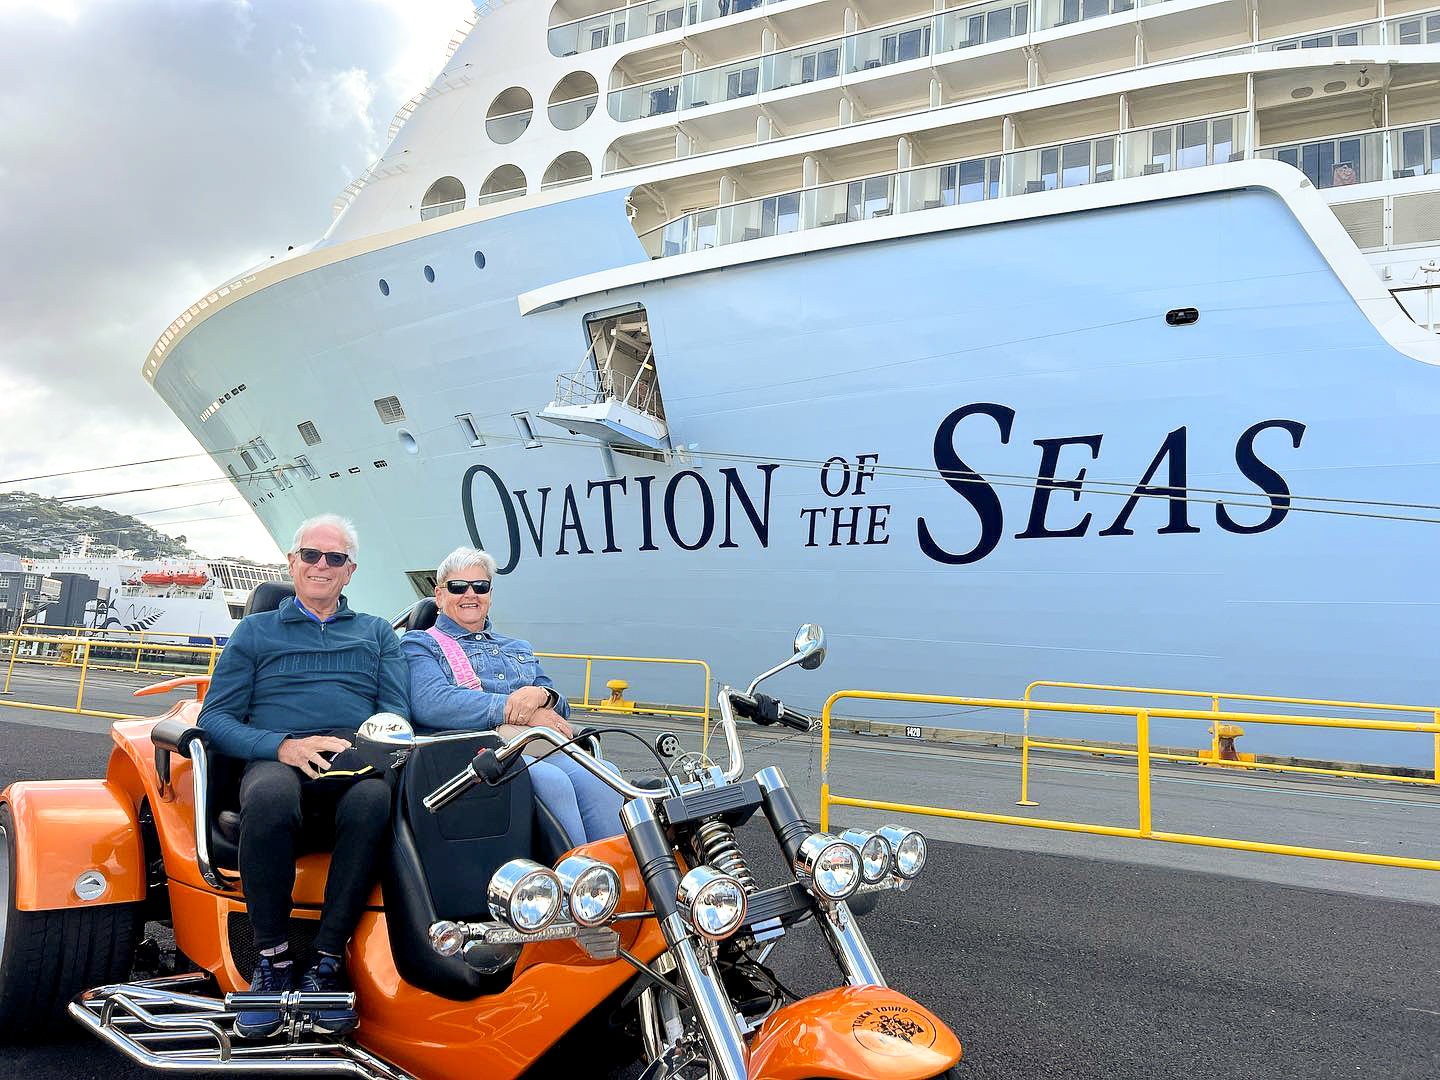 Couple on trike, next to ocean liner